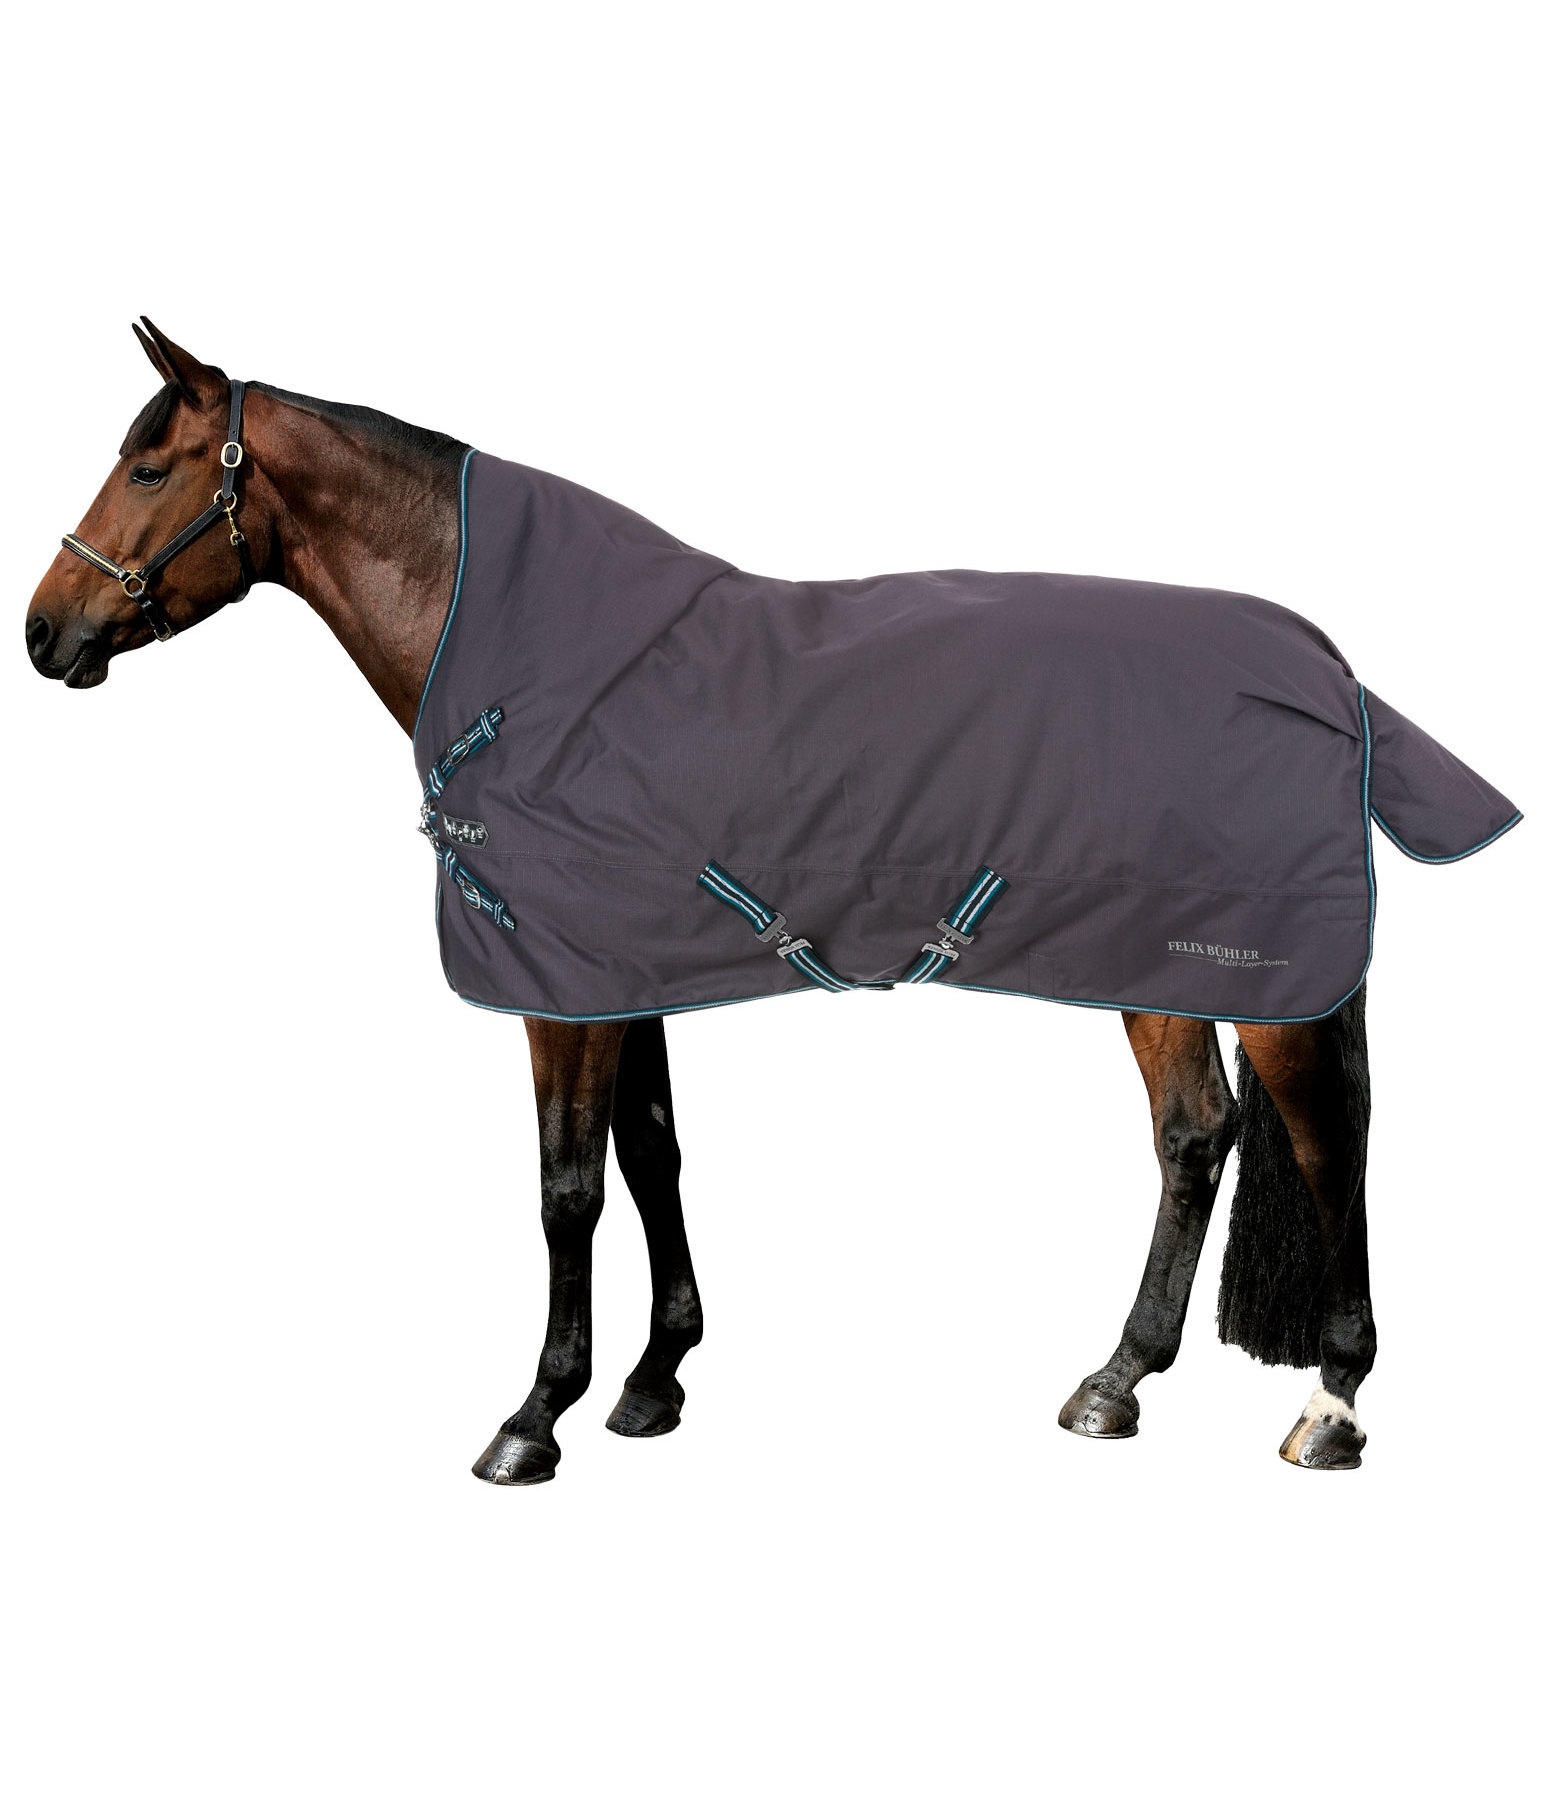 4 in 1 Highneck Turnout Rug with multi-layer system, 0-300g